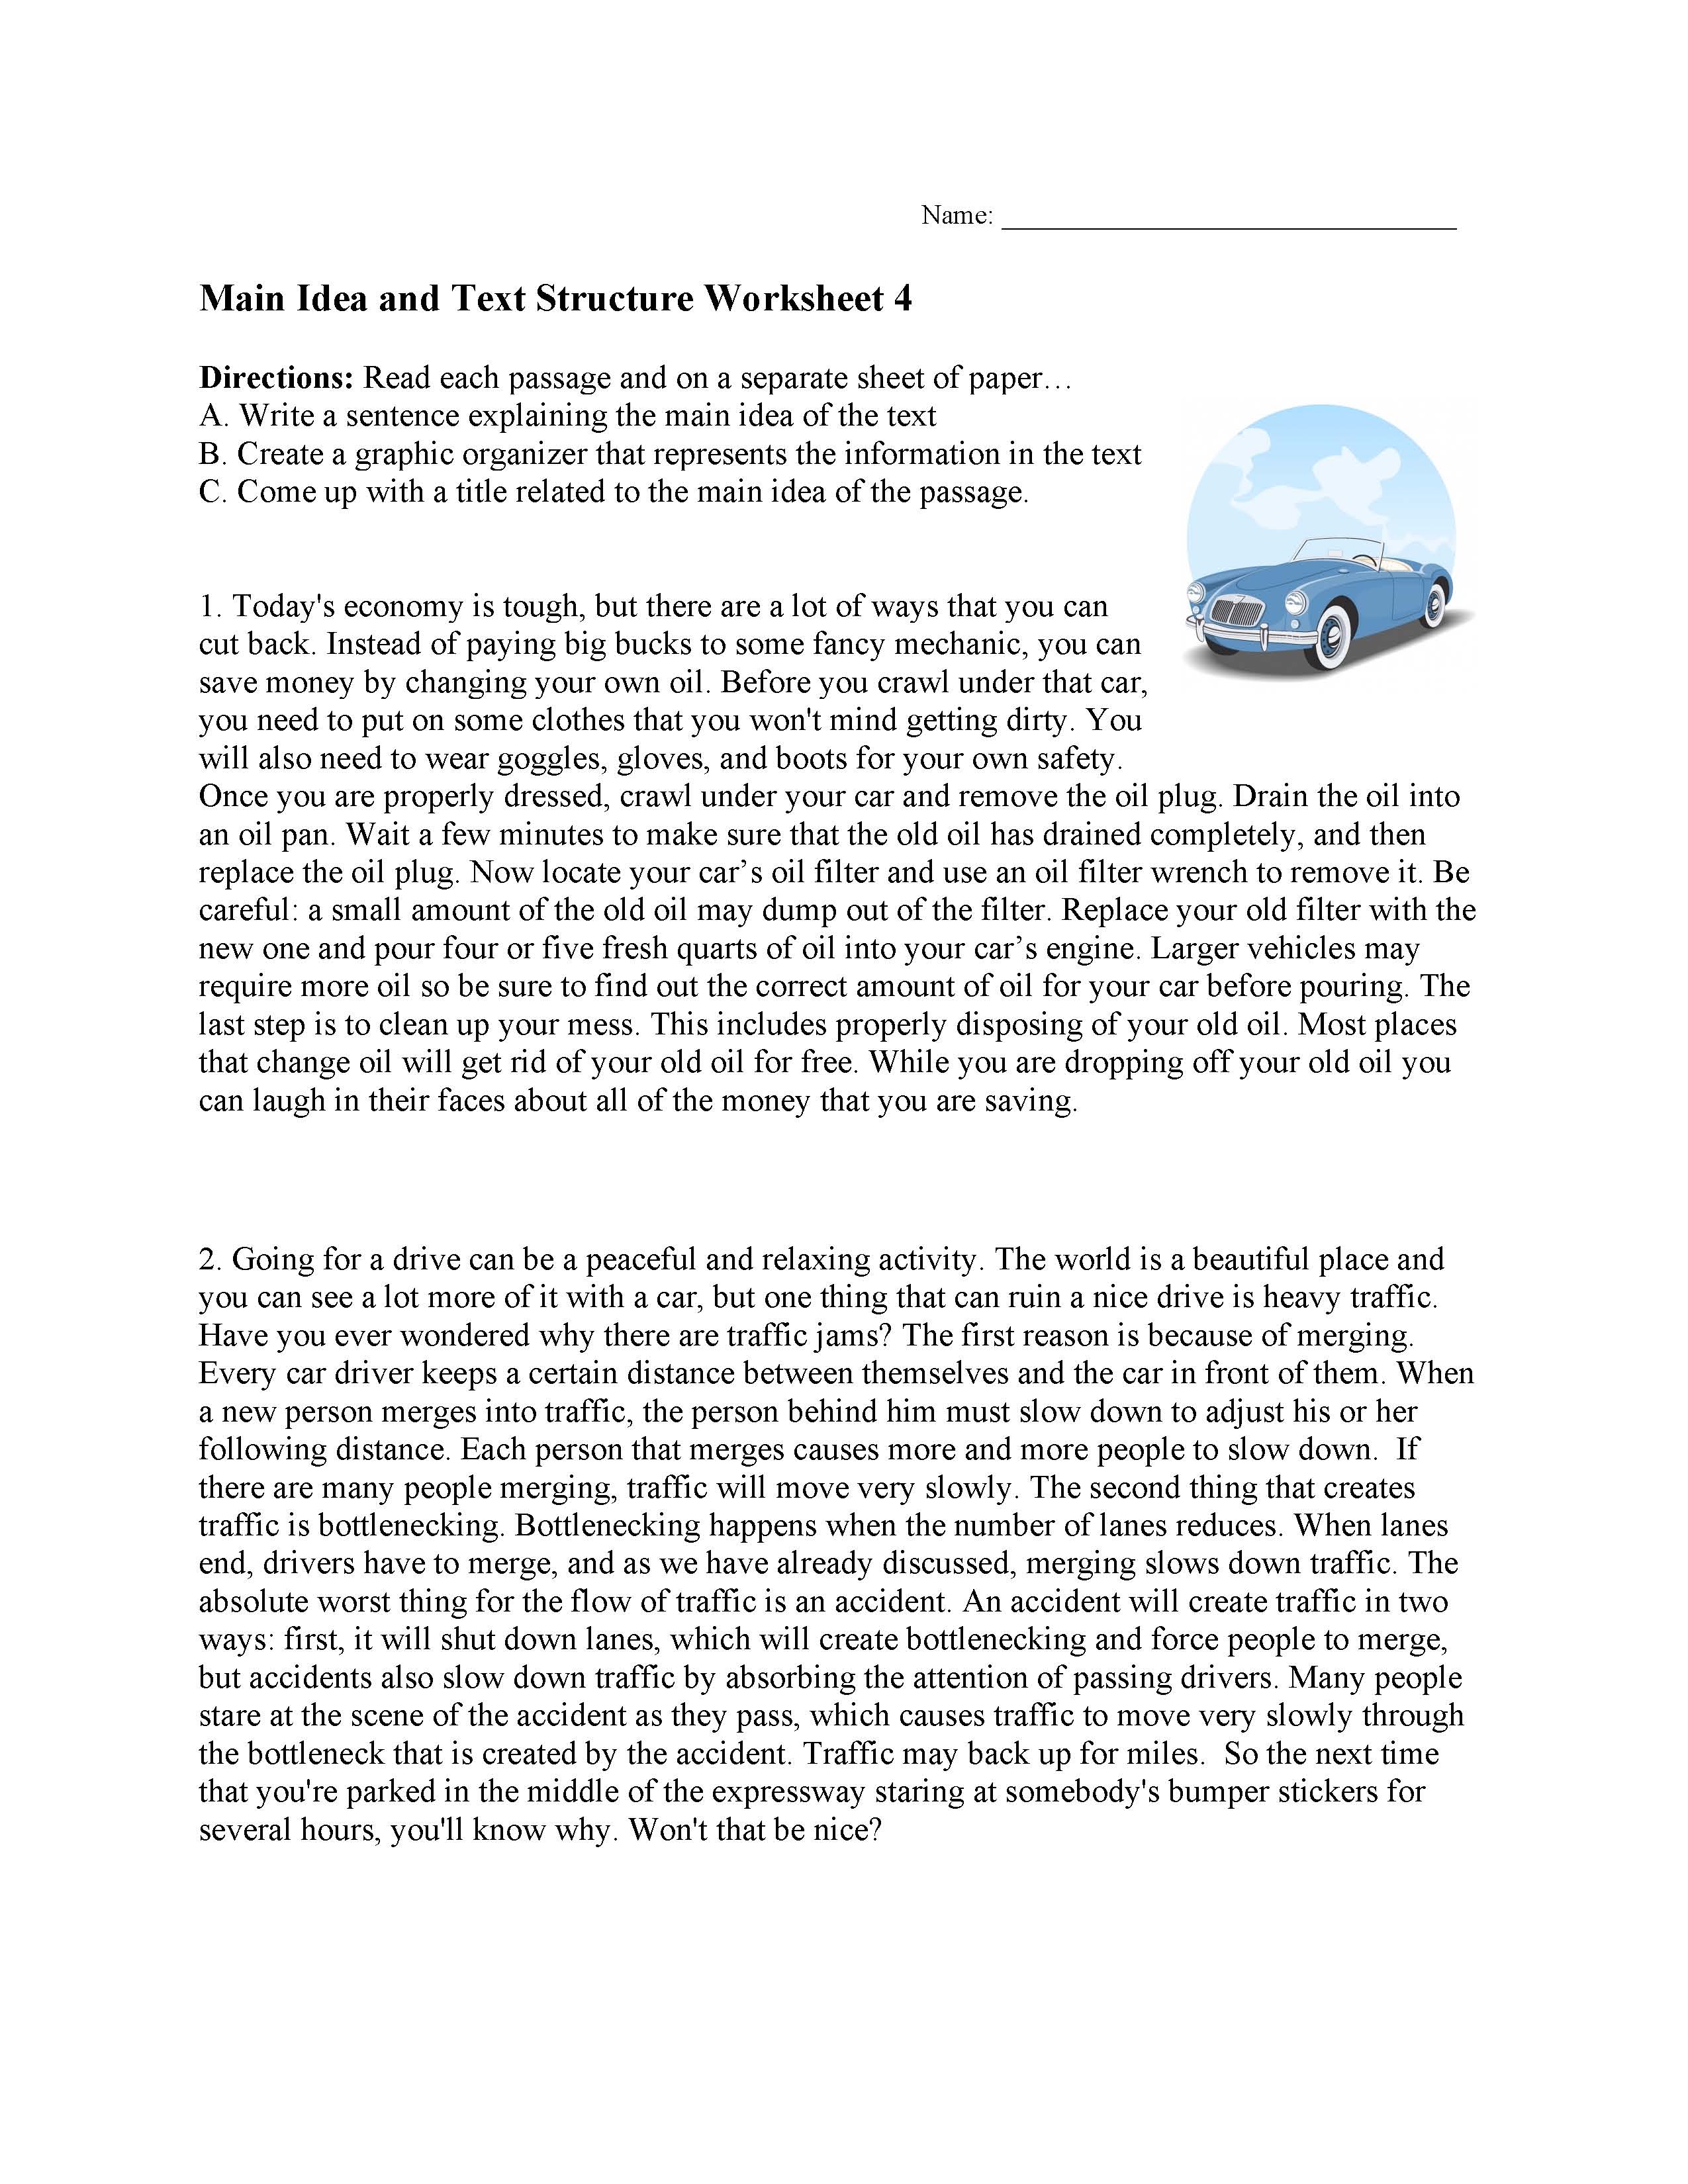 Main Idea and Text Structure Worksheet 11  Preview With Main Idea Worksheet 4